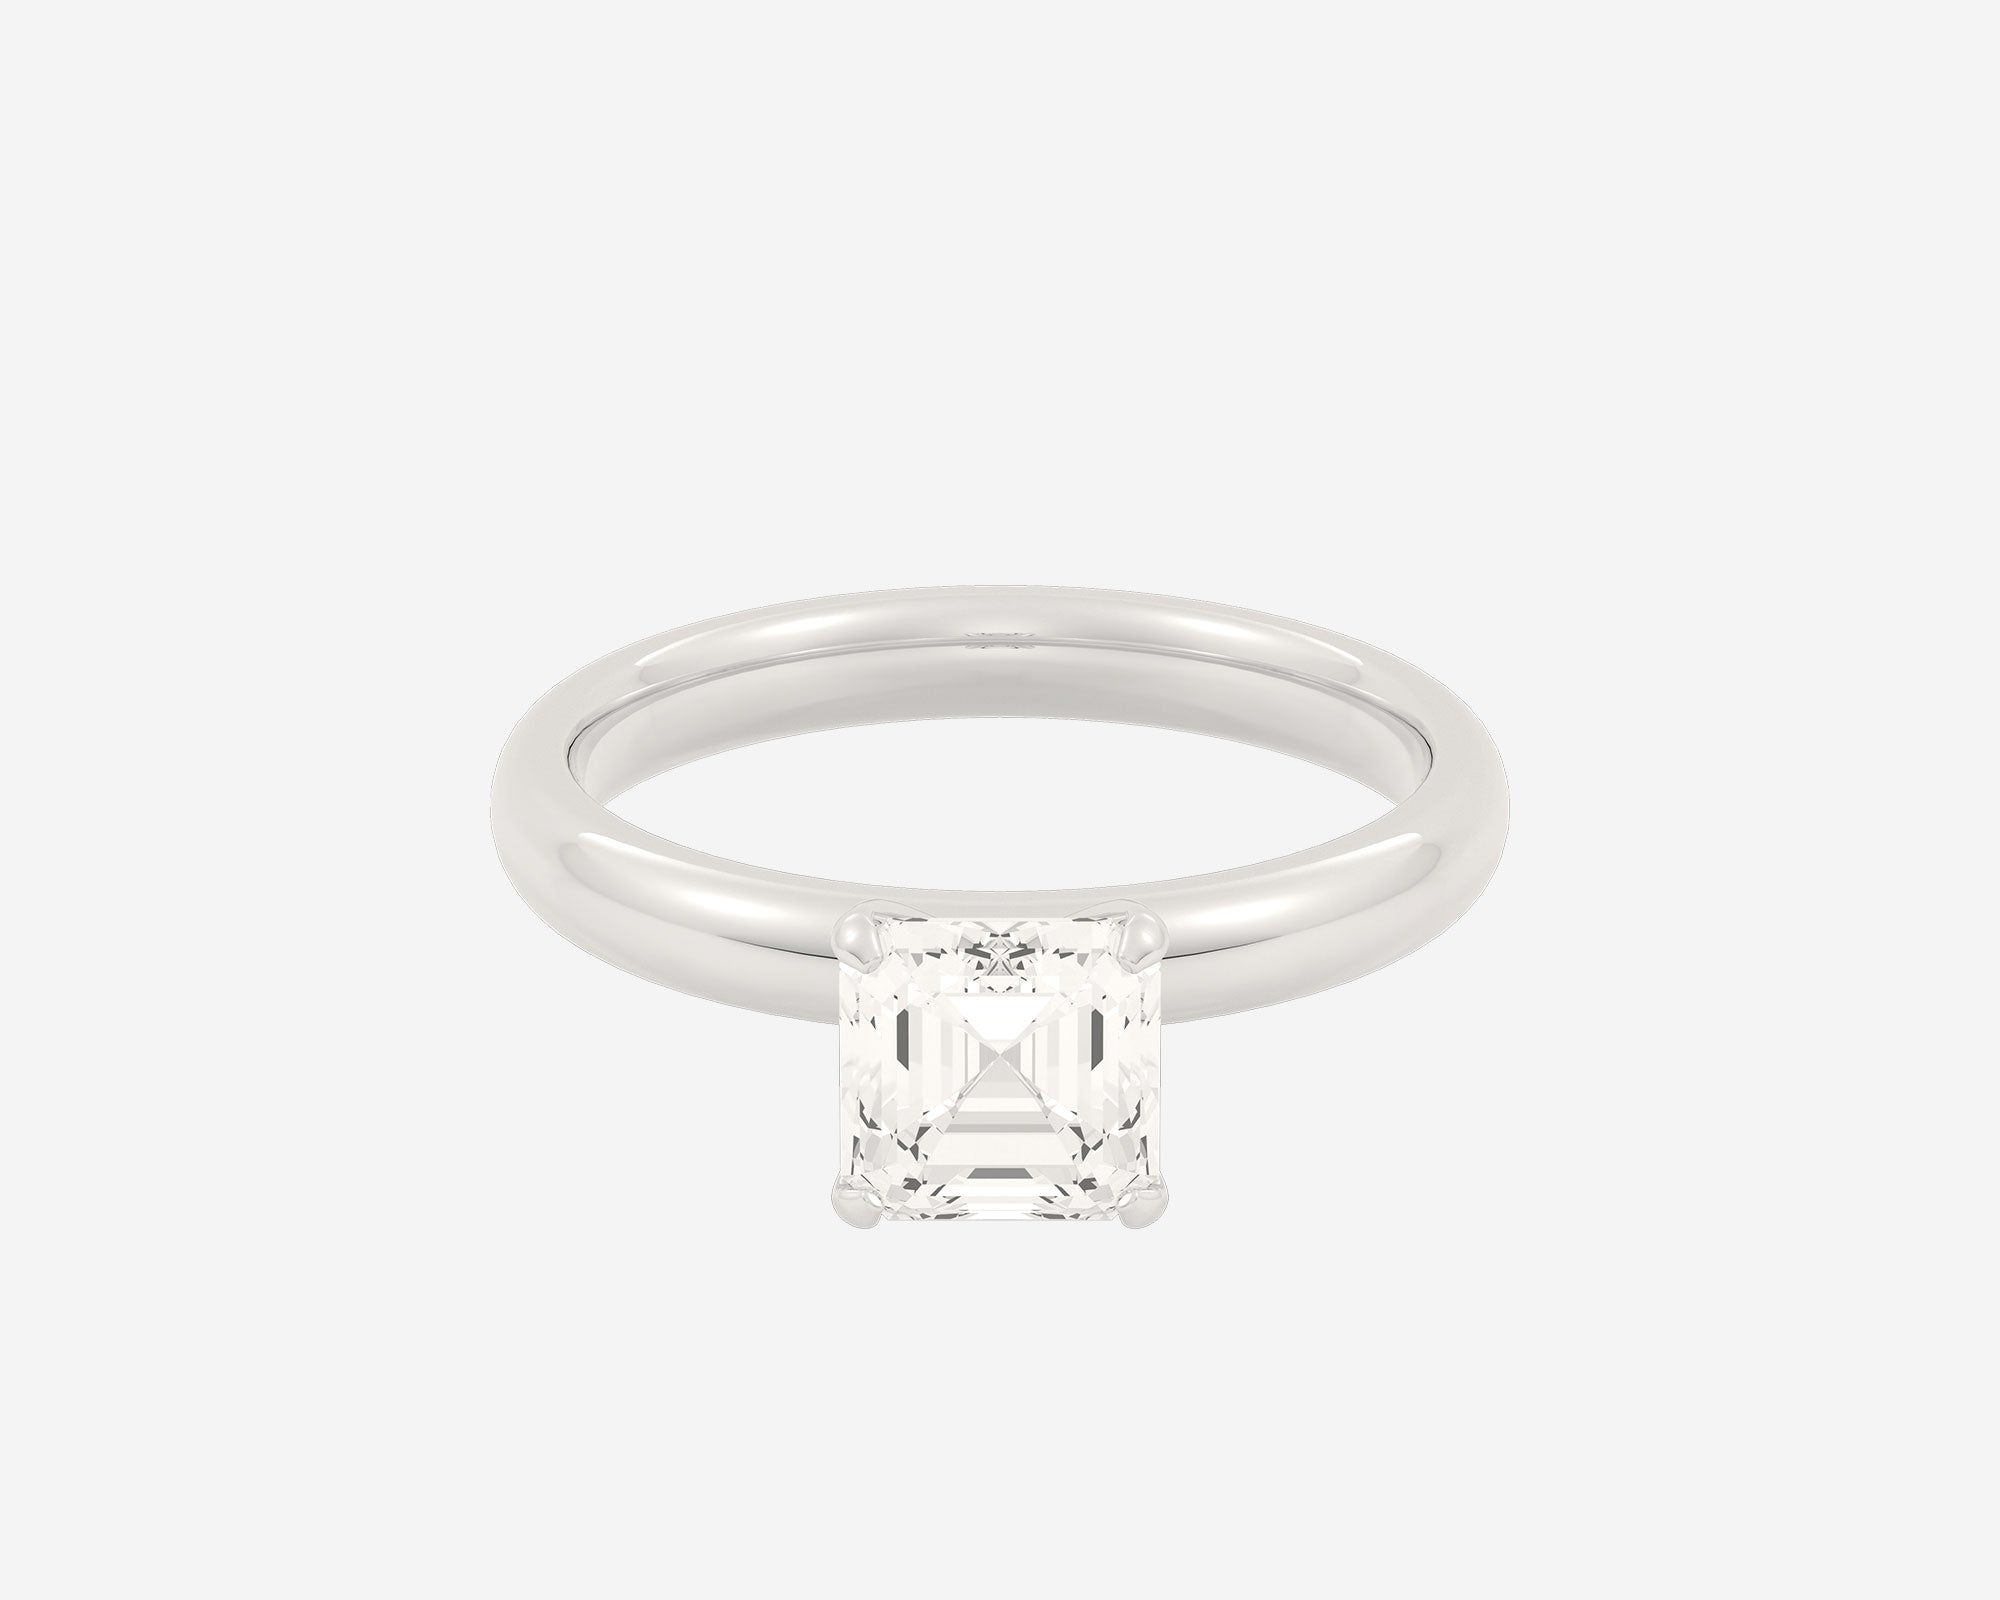 The Domed Solitaire with an Asscher Diamond